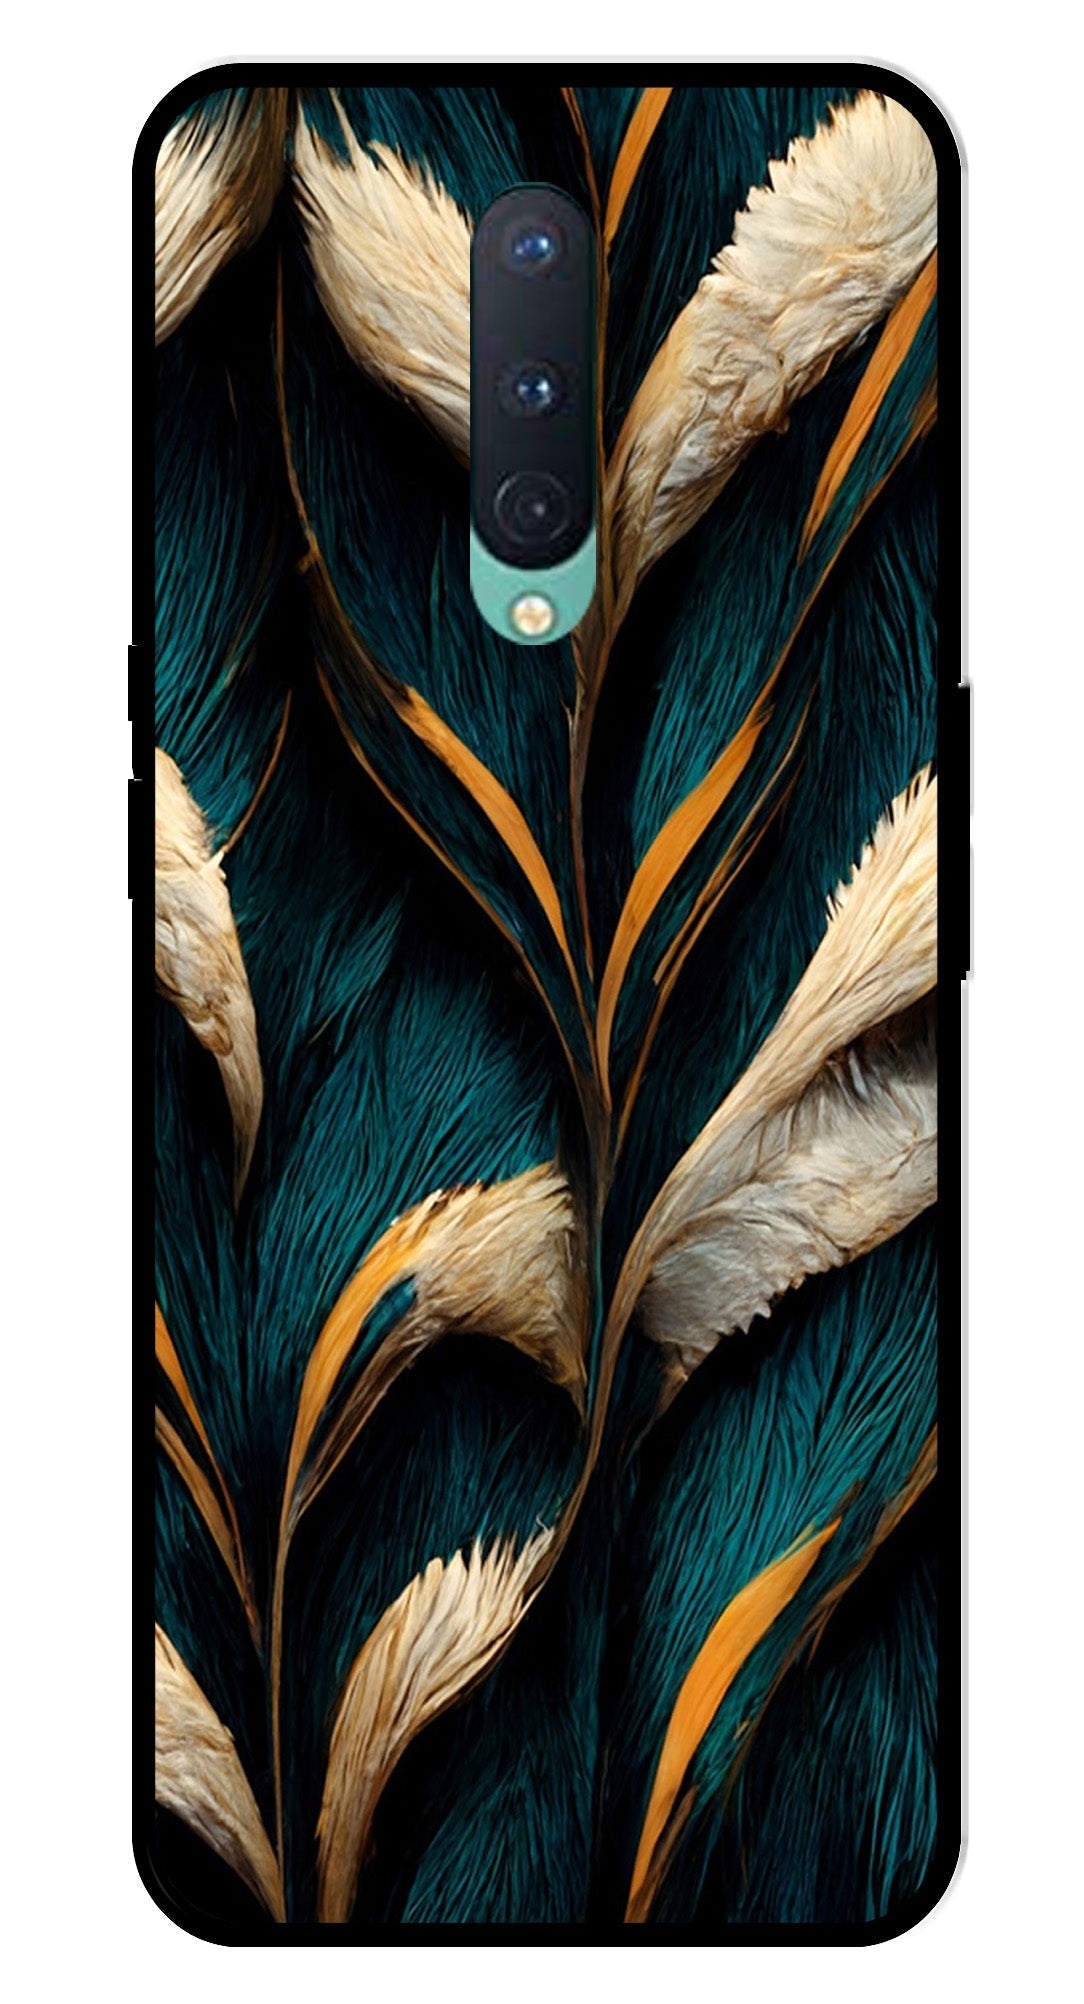 Feathers Metal Mobile Case for OnePlus 8